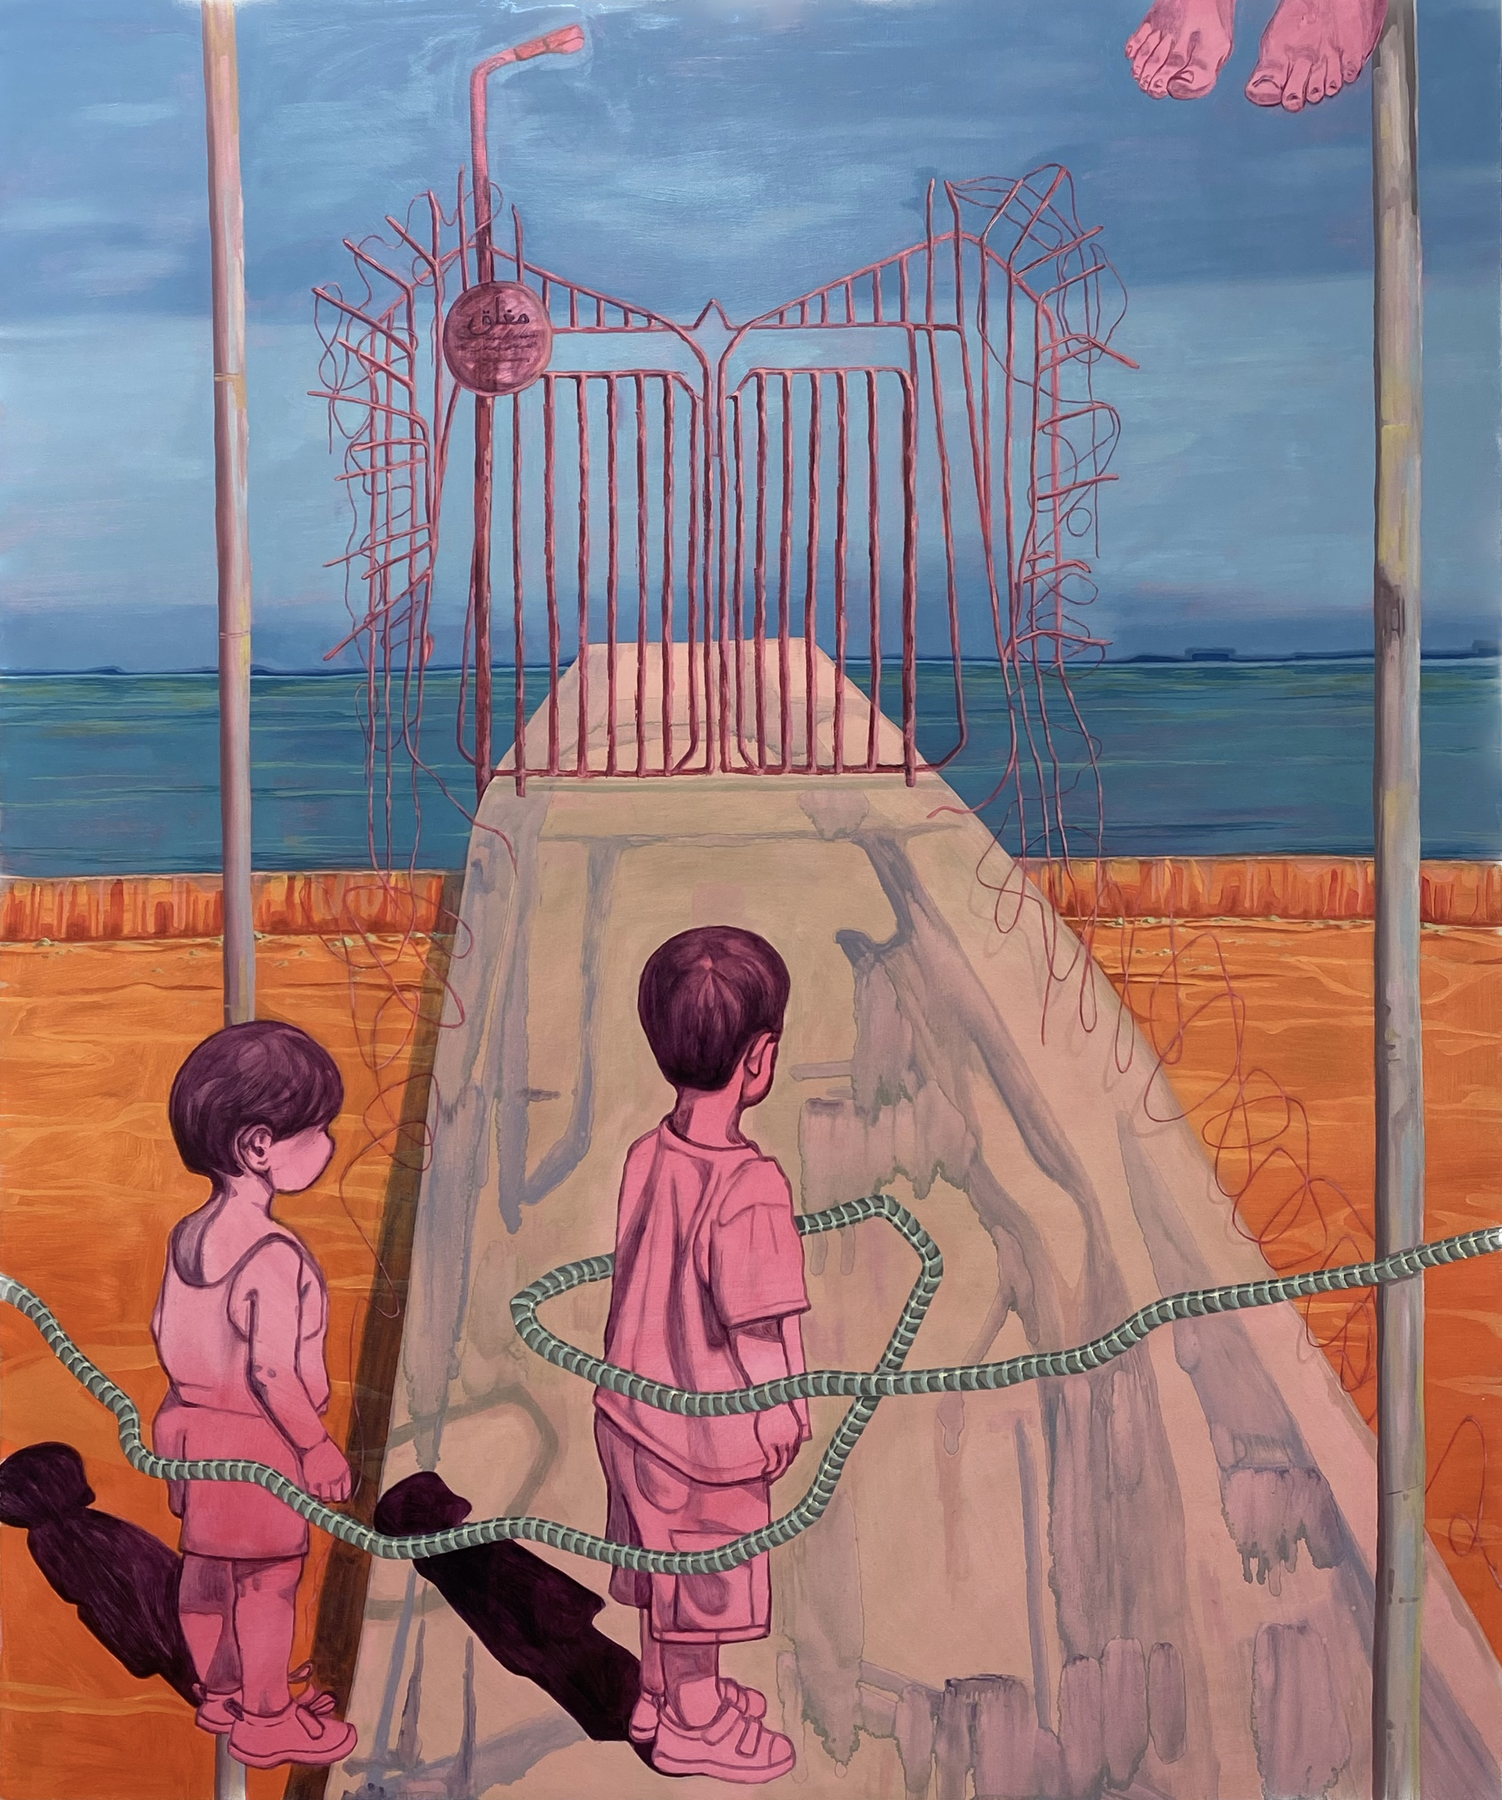 Two children colored pink stand looking through closed metal gates that block the entrance to a bridge crossing a body of water; a cord or chain wraps around them 